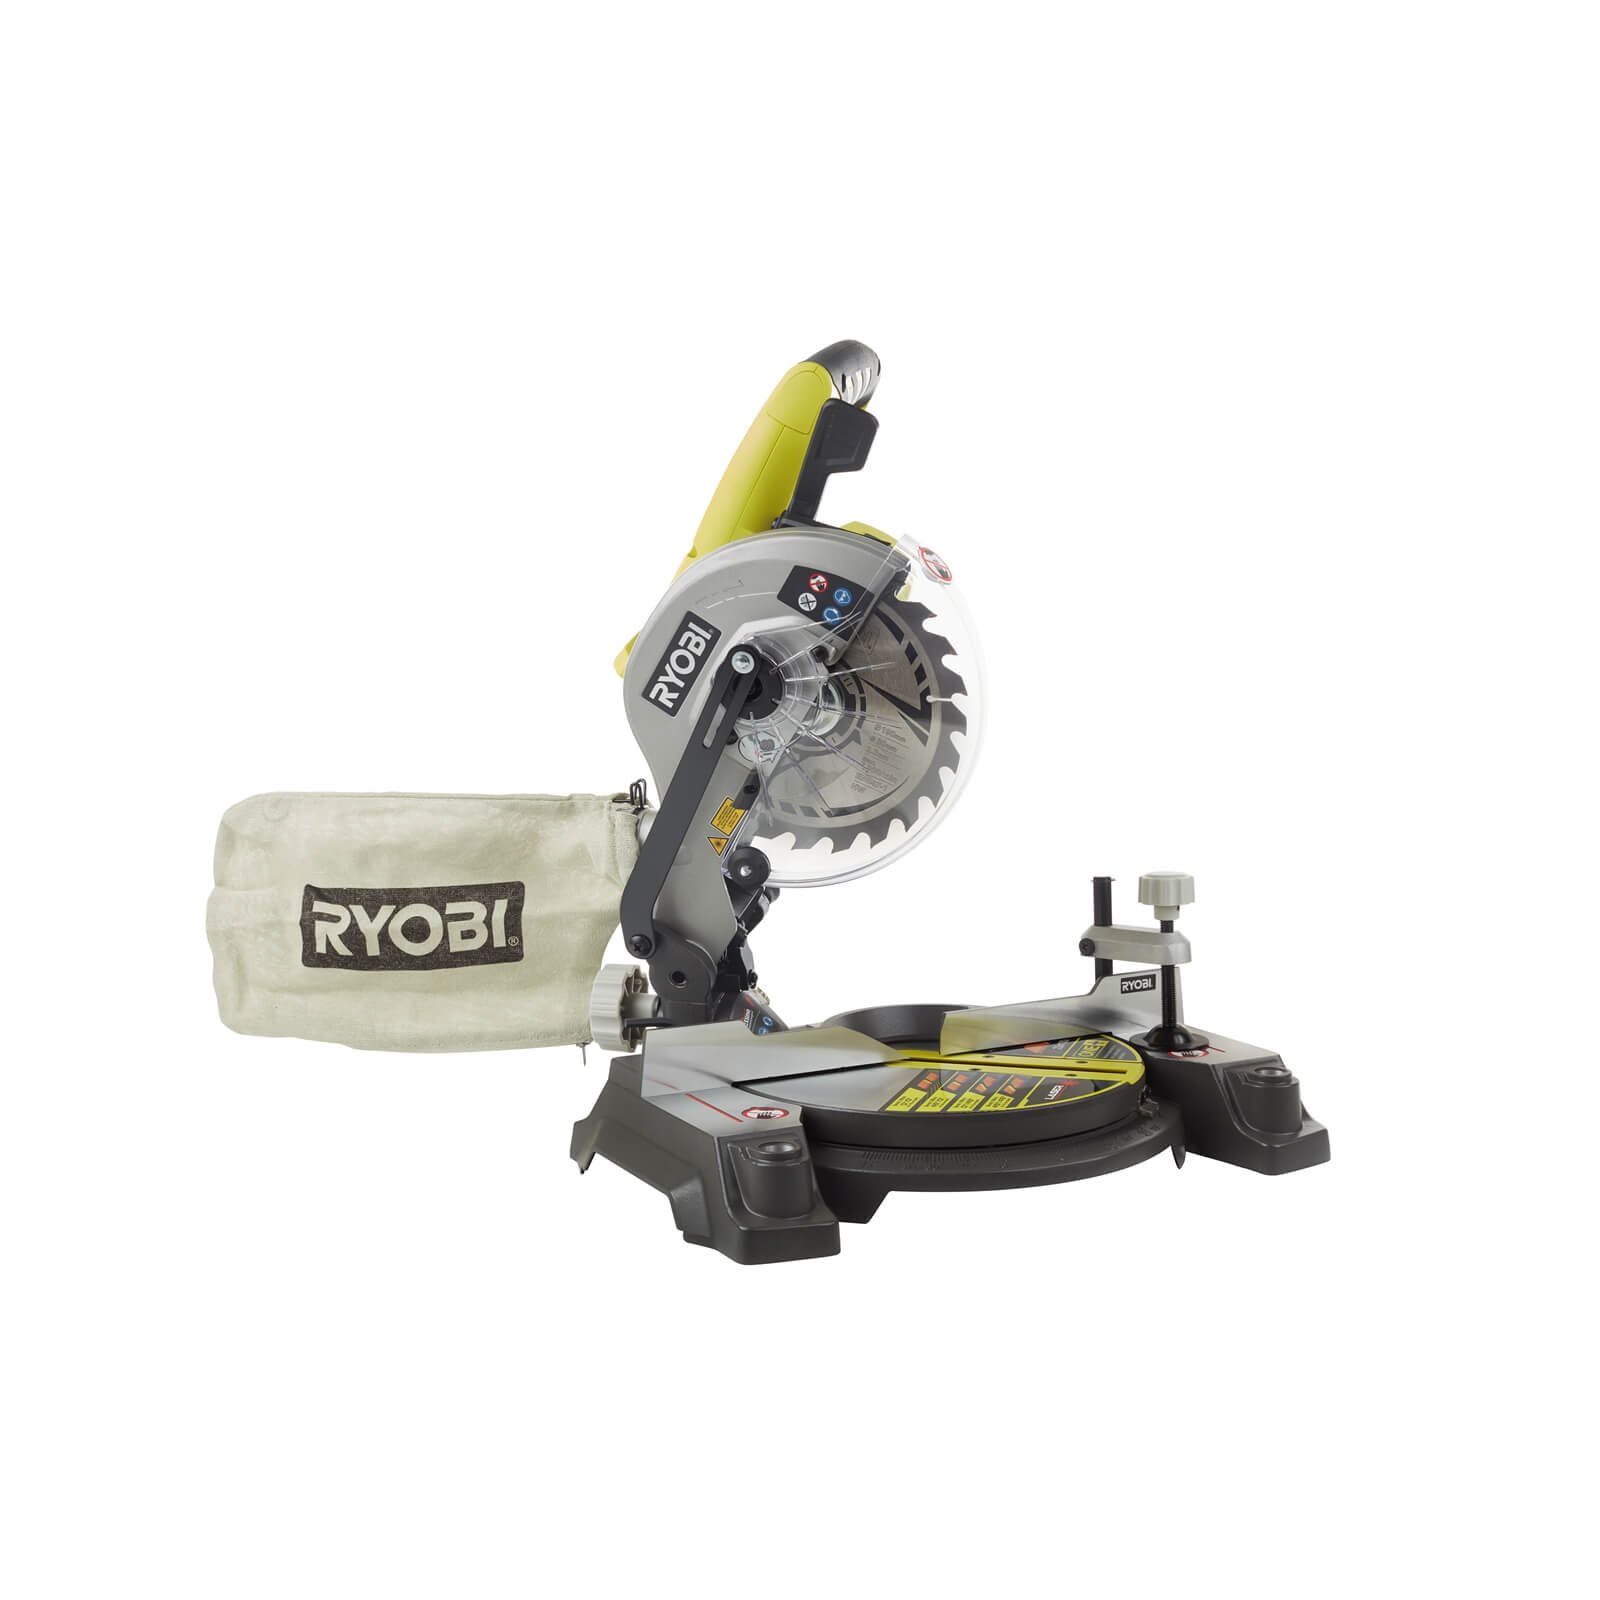 Ryobi ONE+ 18V 190mm Mitre Saw EMS190DCL (Tool only)